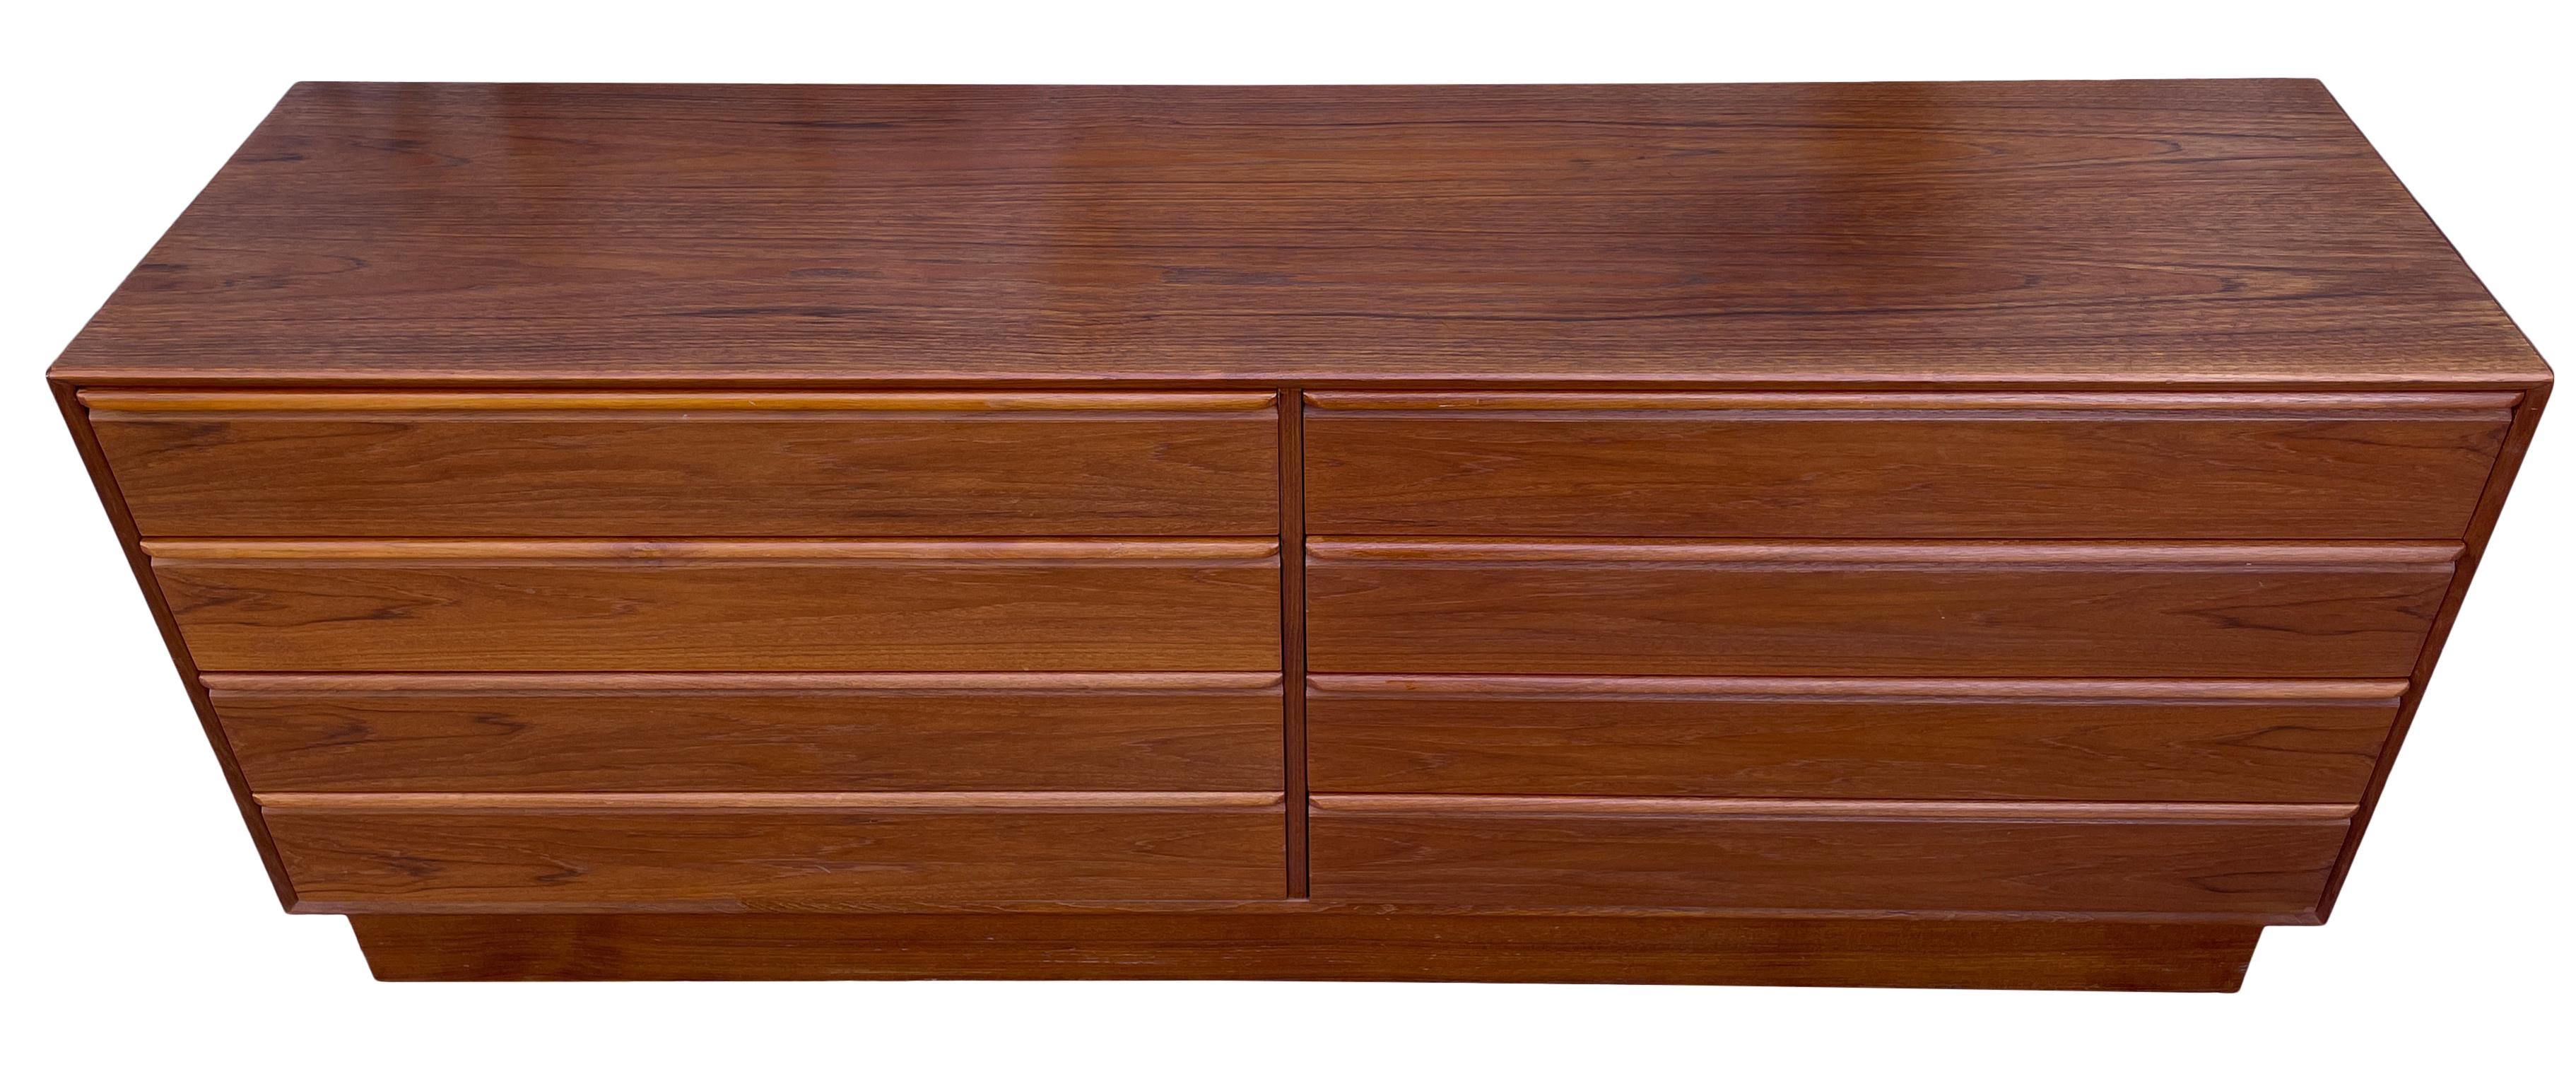 Beautiful Mid-Century Norwegian modern low teak 8-drawer dresser credenza by Westnofa. Great design and great vintage condition - clean inside and out. Drawers slide smooth with dovetail construction and carved handles. Stunning Wood grain. Shows